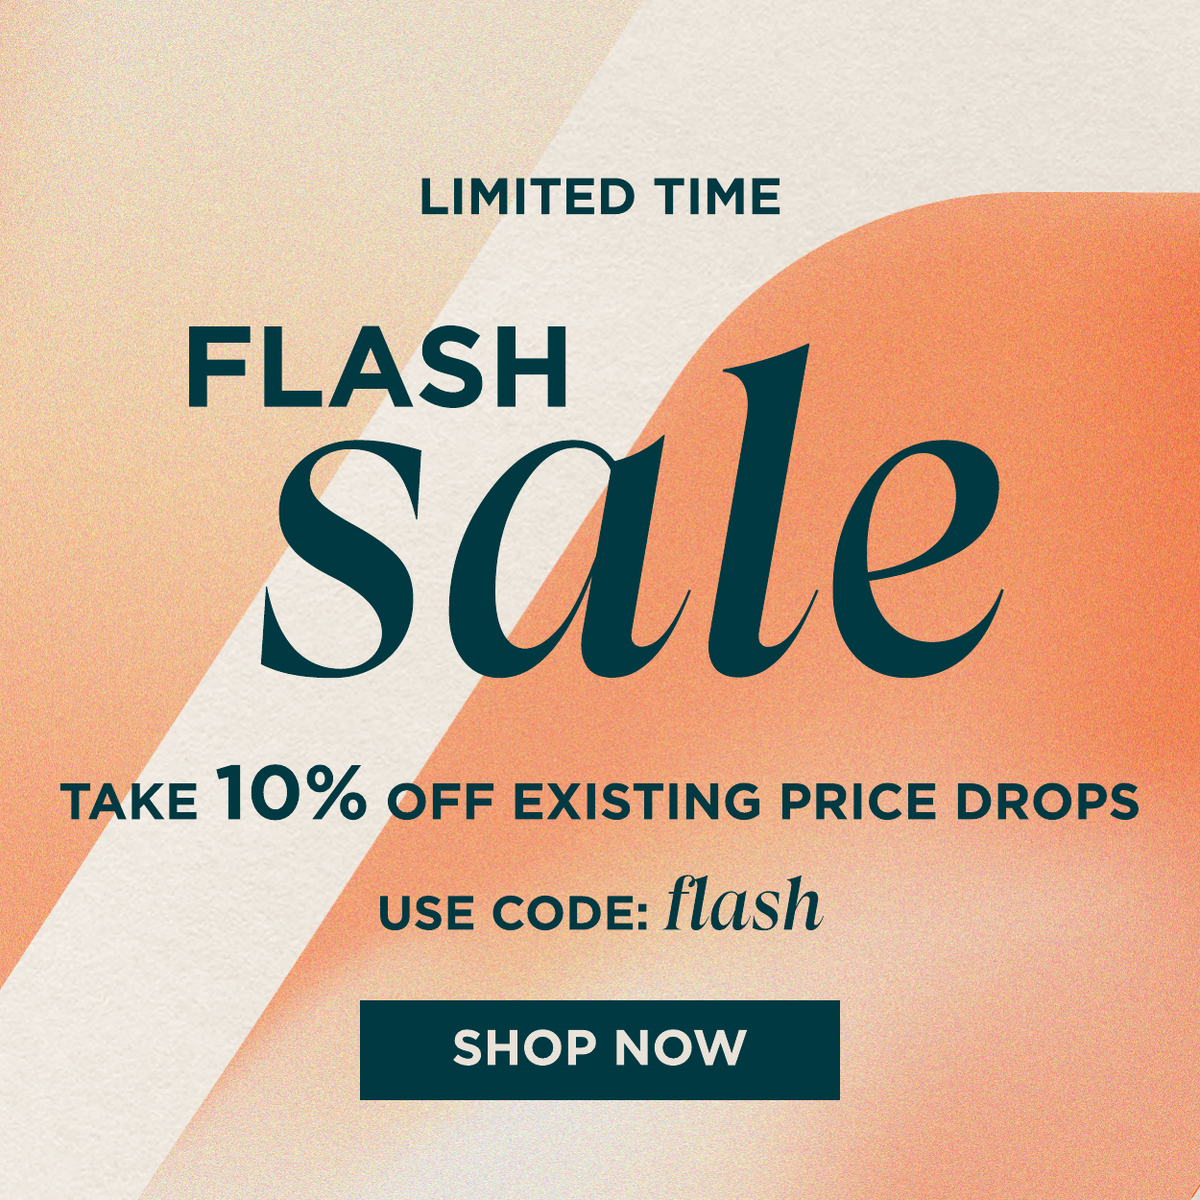 Flash sale take 10% off existing price drops Use code: FLASH 'Shop Now'